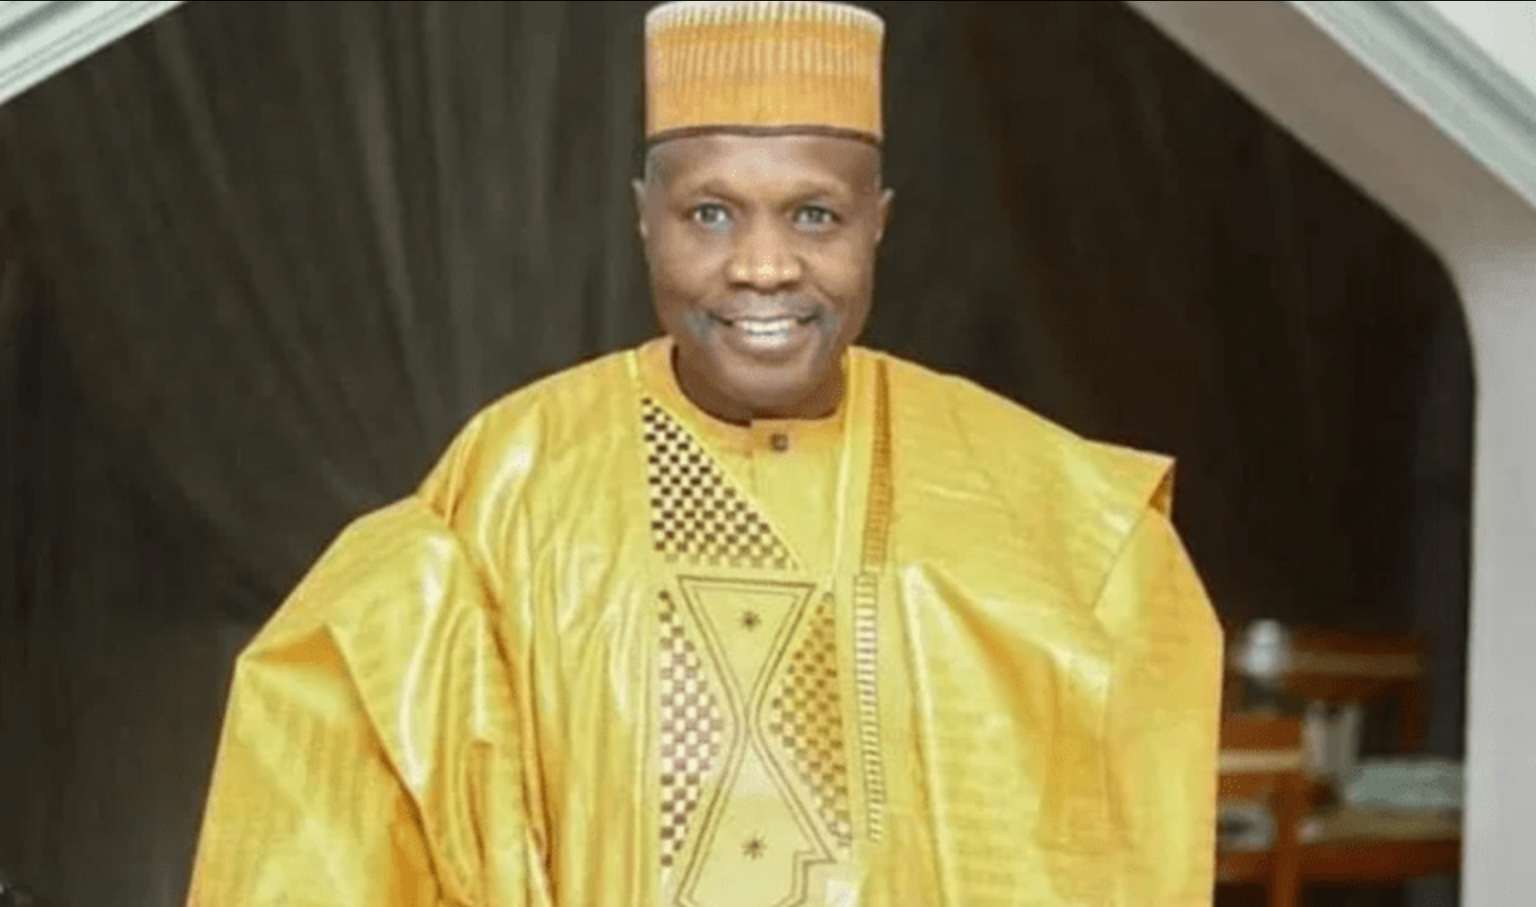 Gombe State Governor Imposes Curfew After Communal Clash